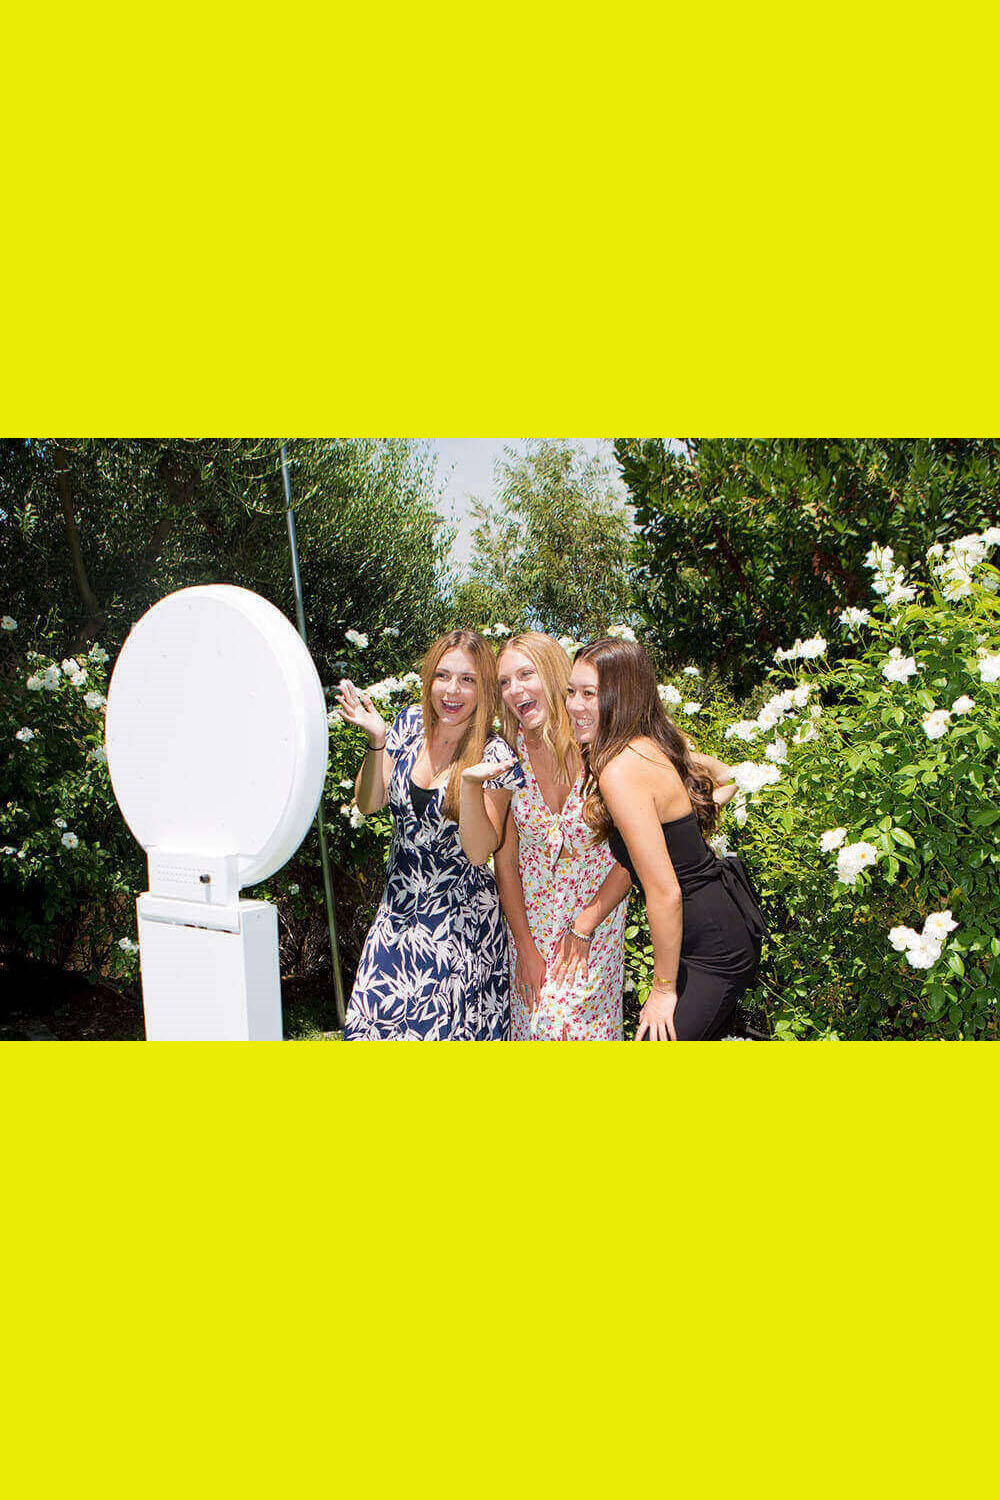 Three girls know how to have fun with this San Fernando Valley selfie station.